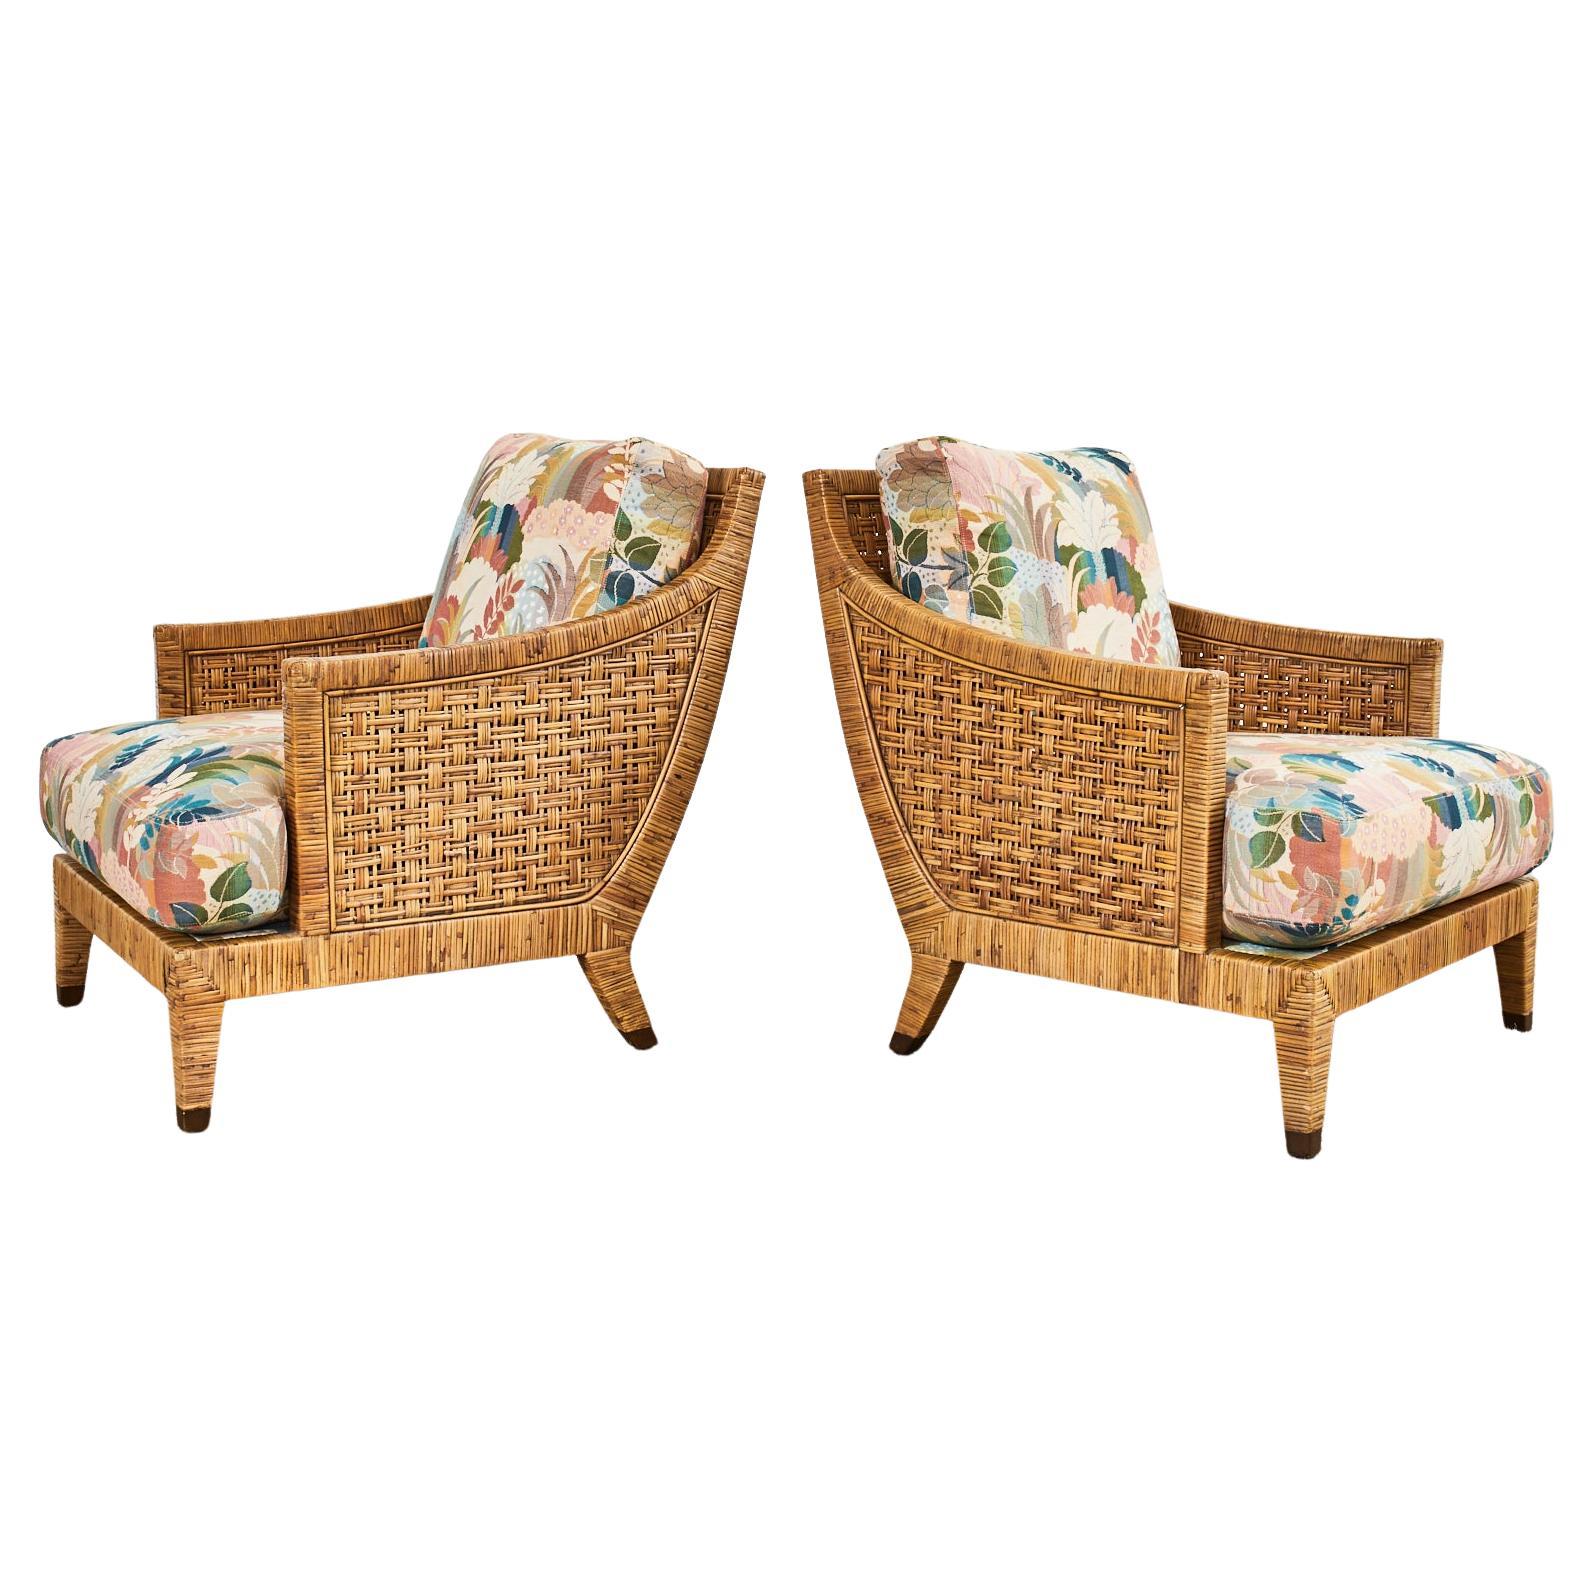 Pair of McGuire St. Germain Woven Rattan Cane Lounge Chairs